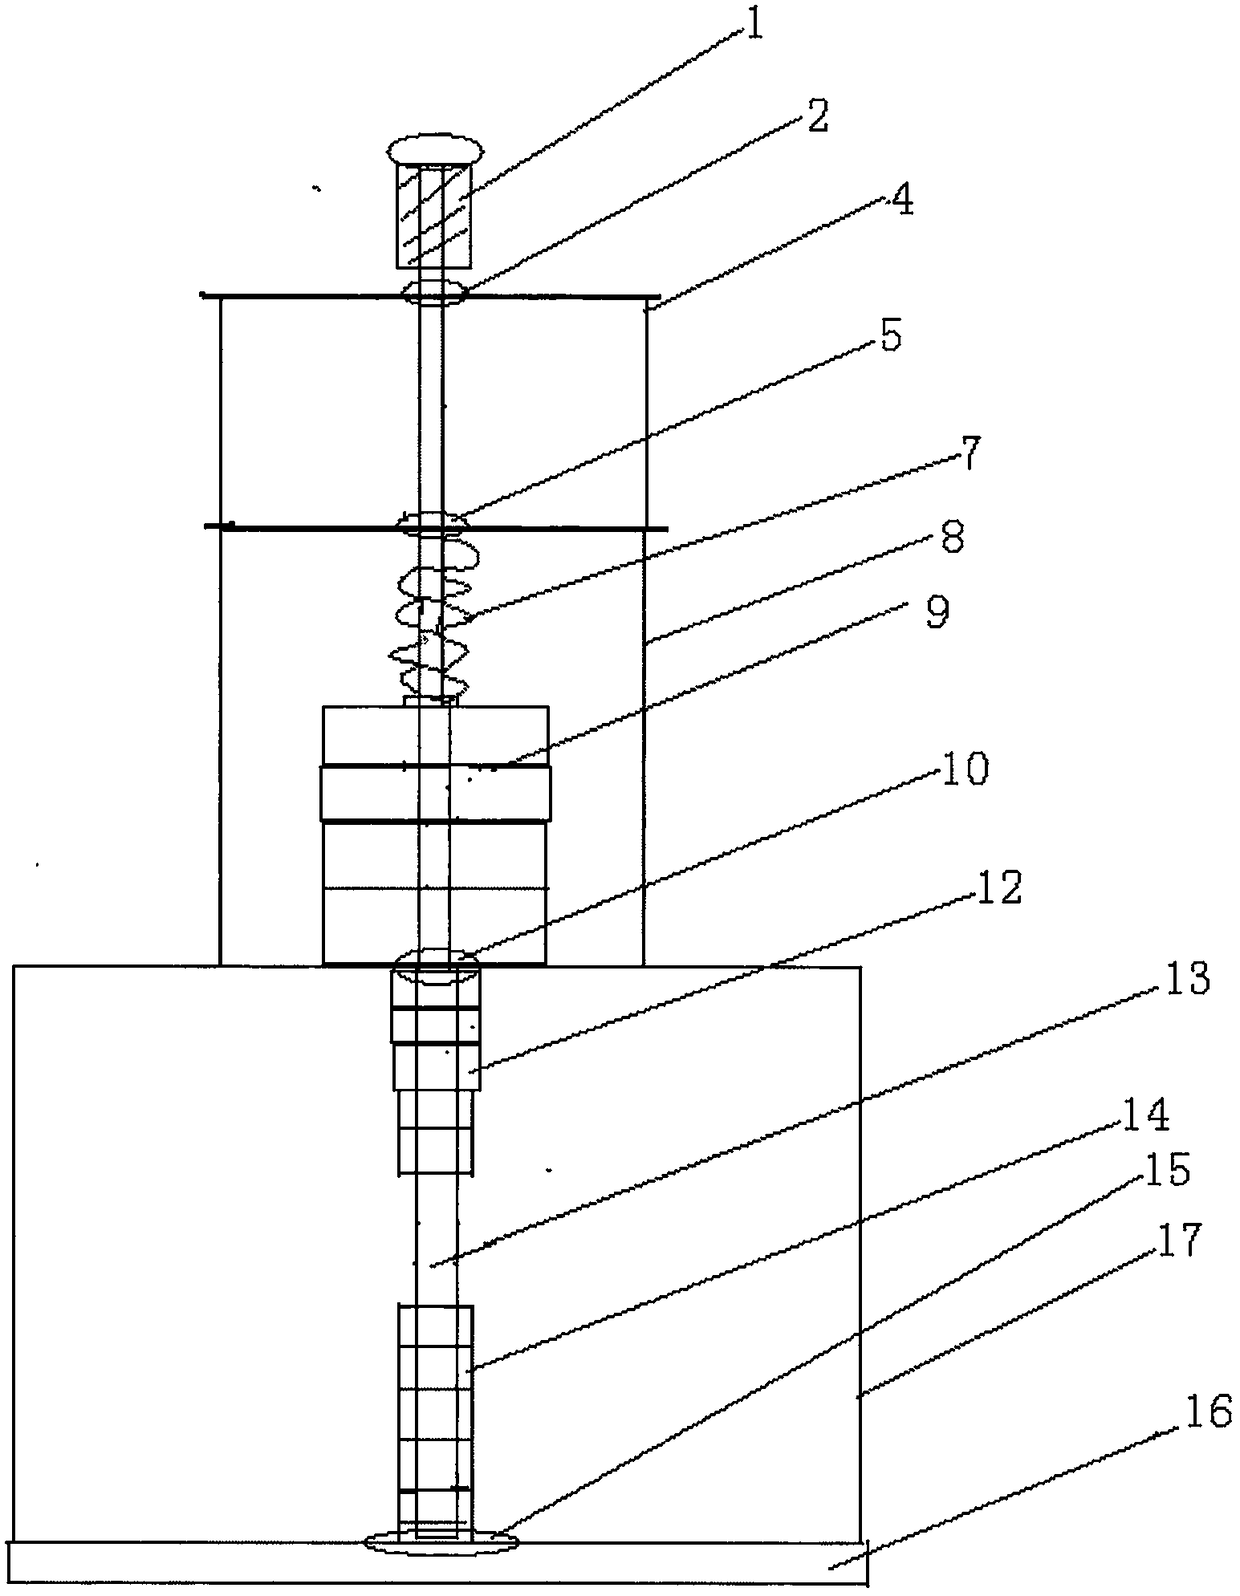 Counting device for demonstrating magnitude of magnetic force